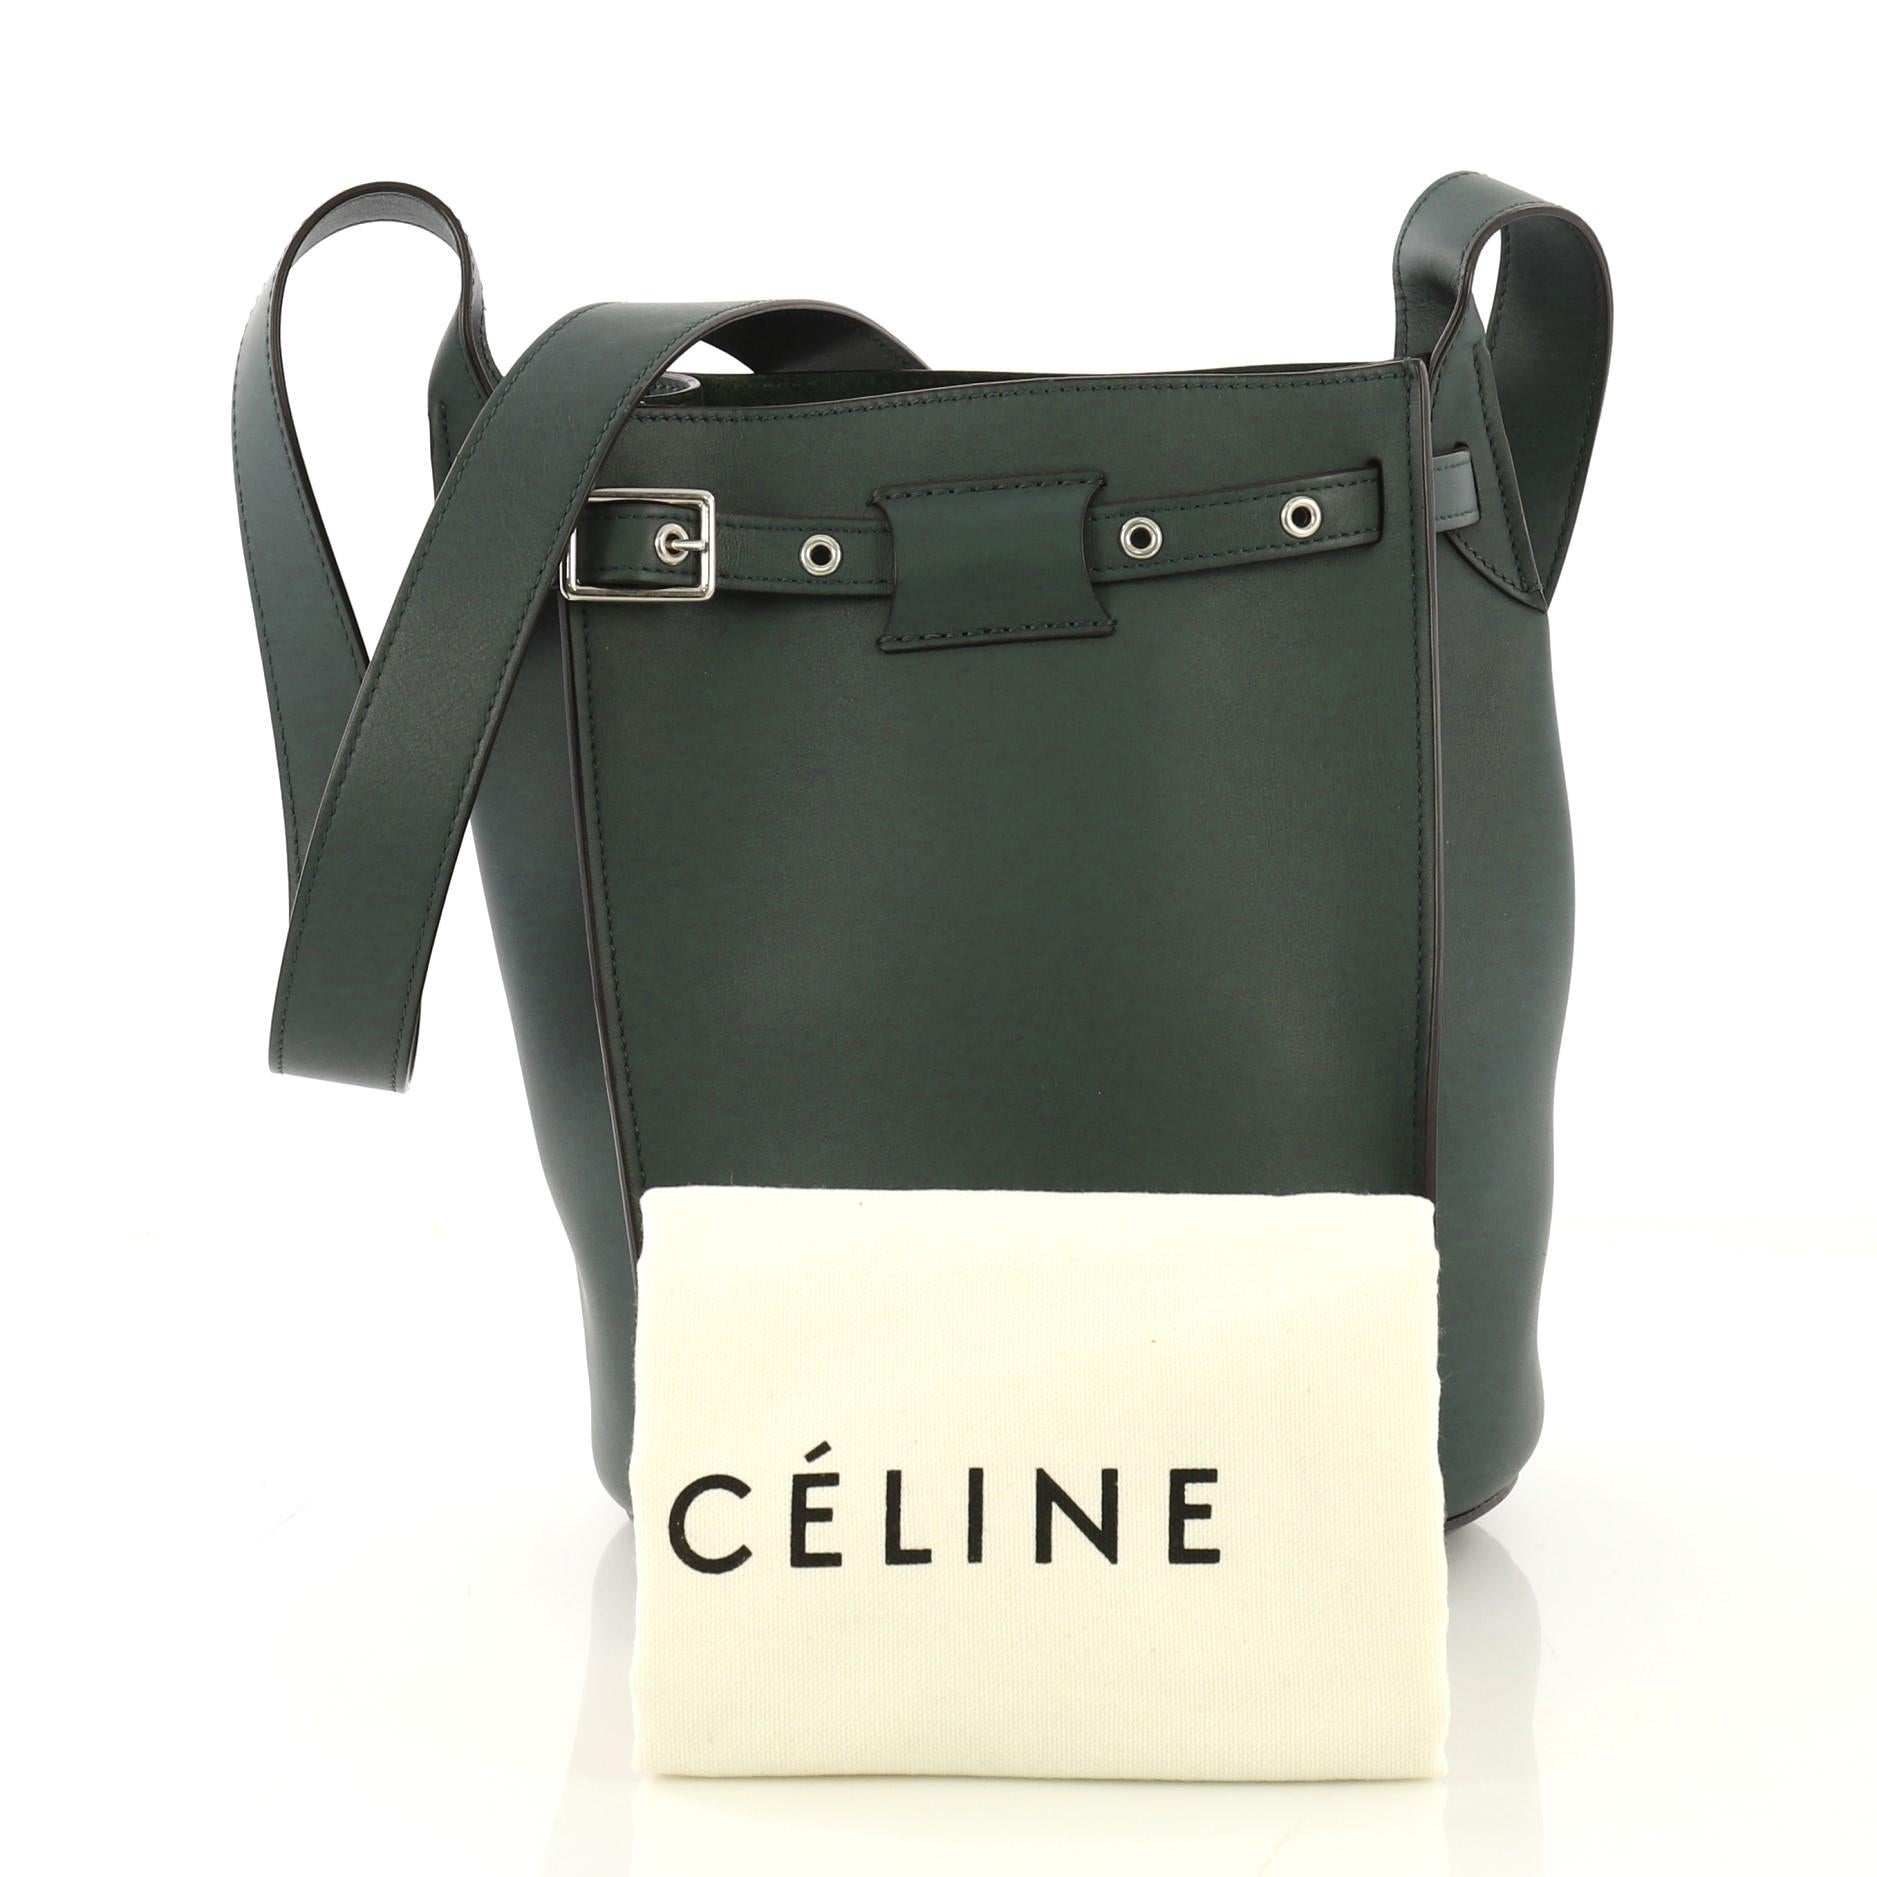 This Celine Big Bag Bucket Leather, crafted in green leather, features long leather strap and silver-tone hardware. Its belt drawstring closure opens to a green suede interior with side slip pocket.

Estimated Retail Price: $2,200
Condition: Great.